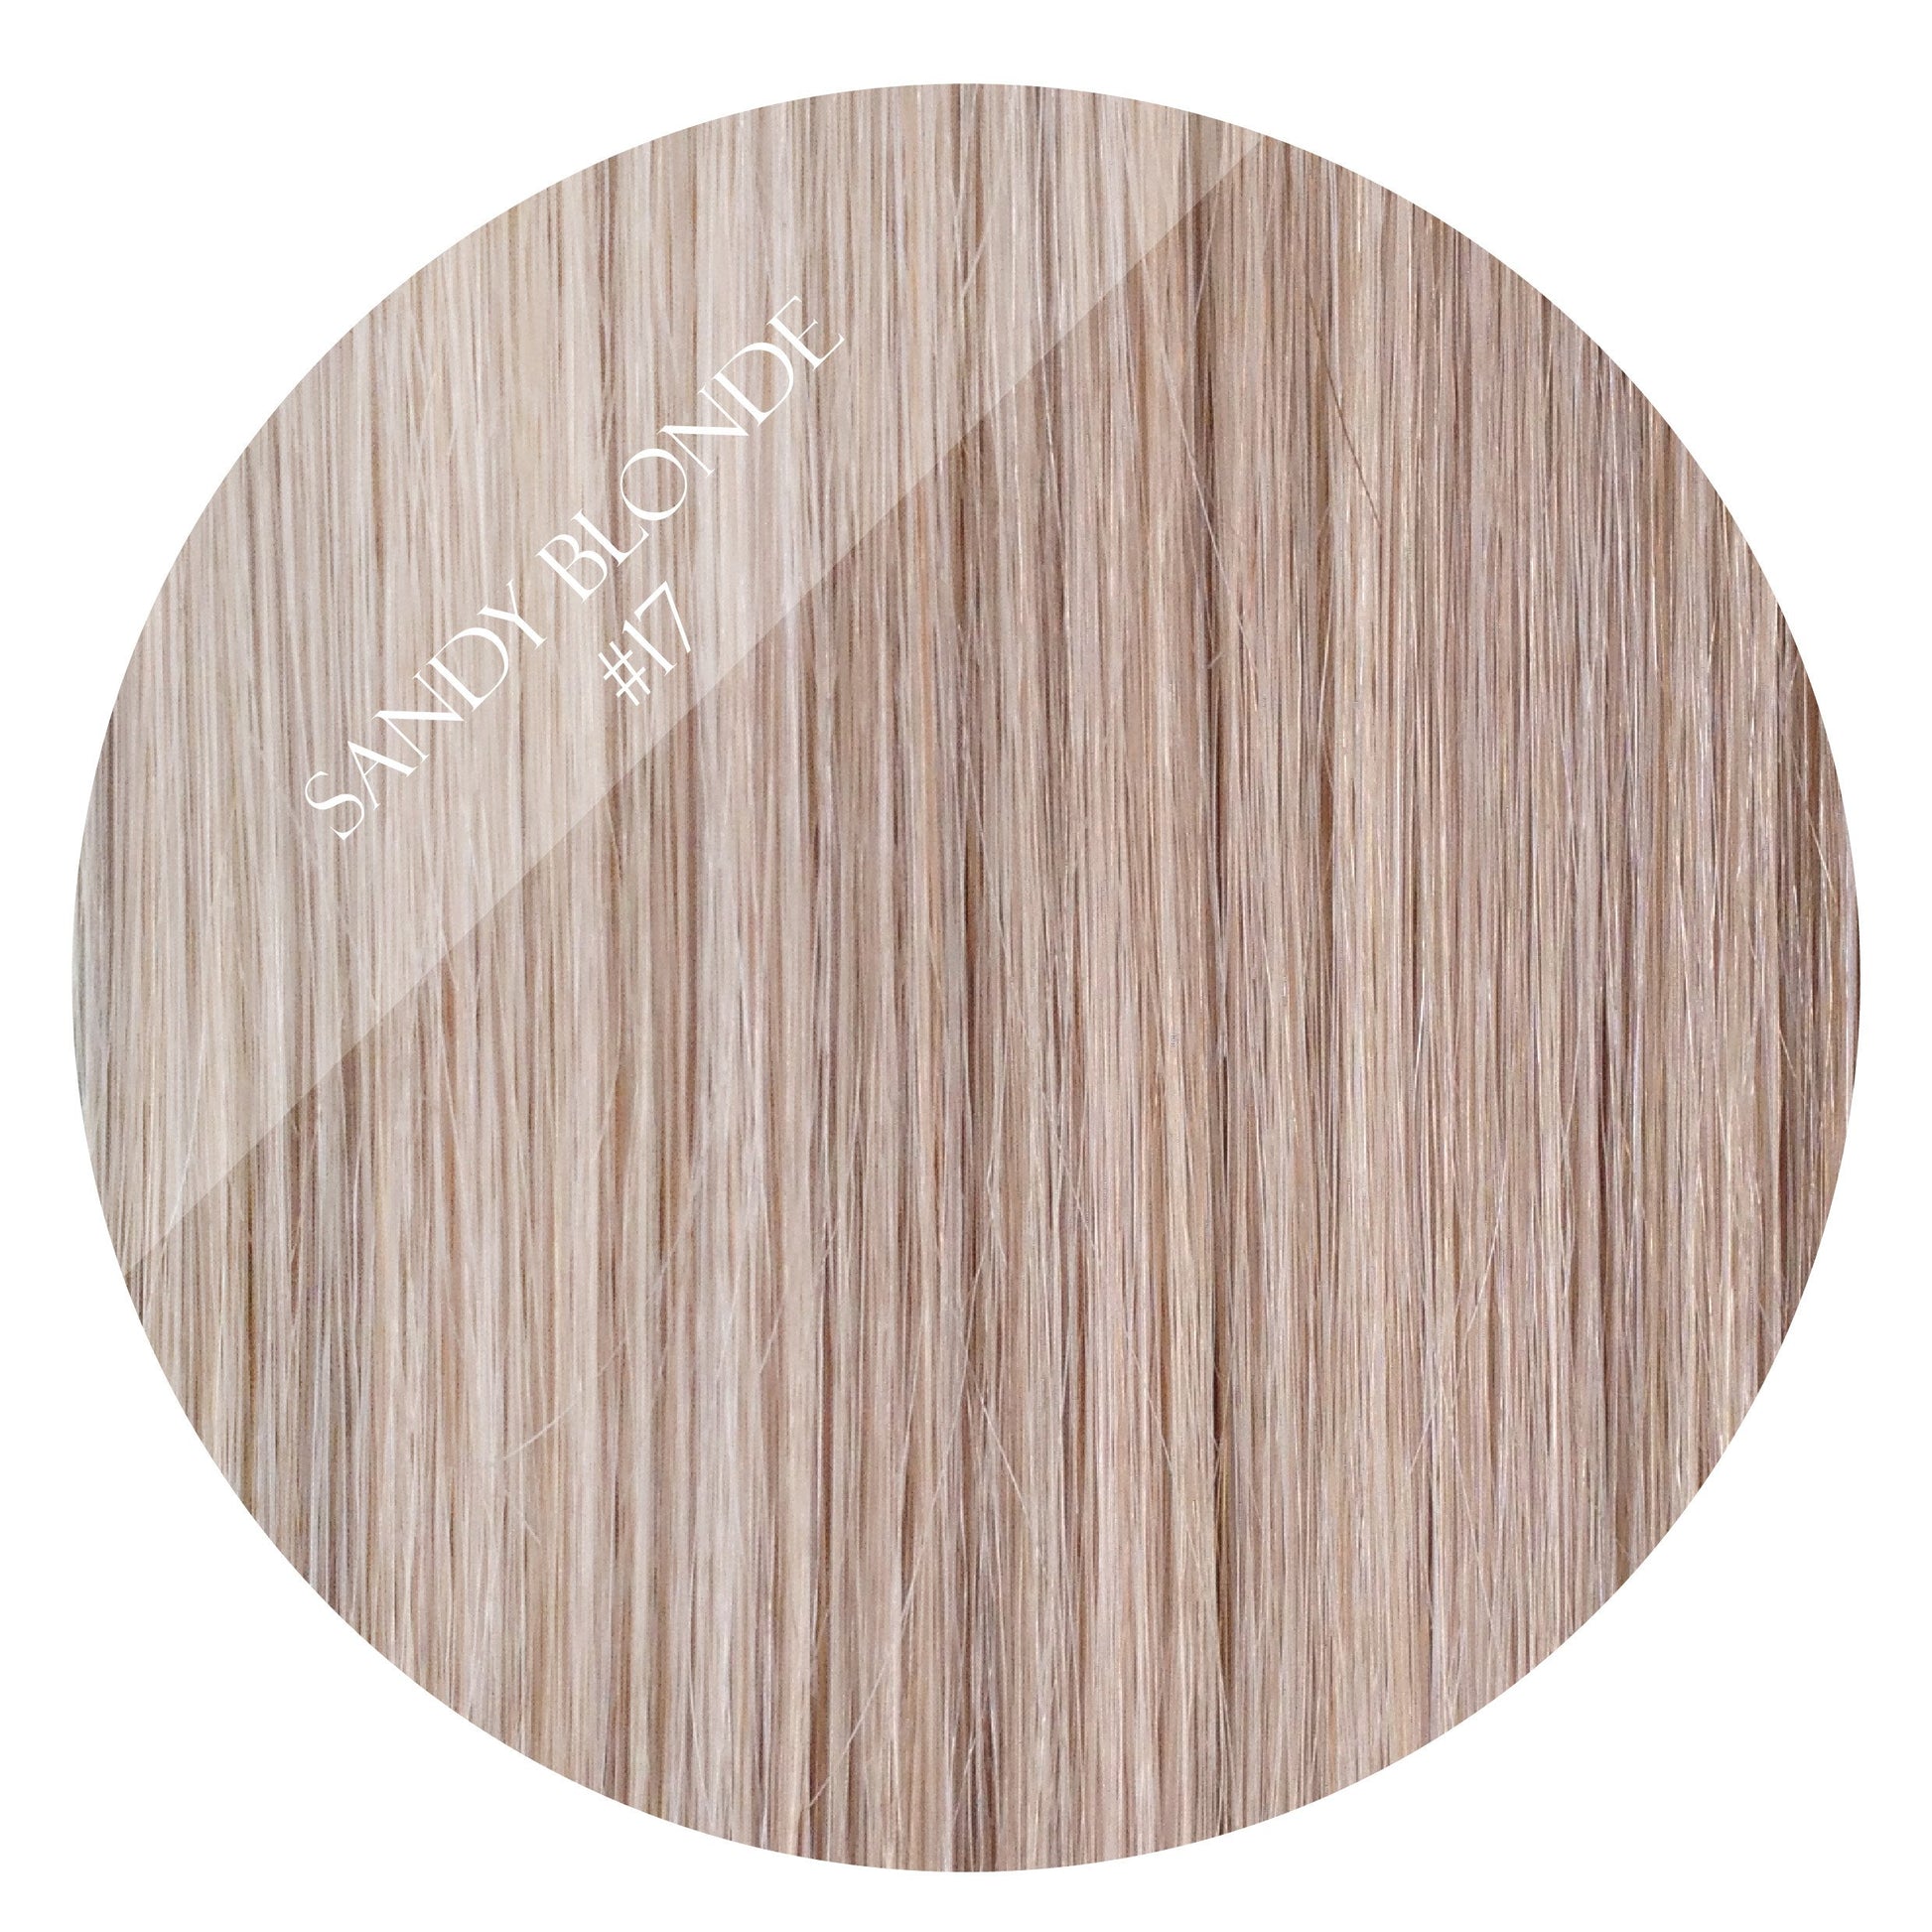 latte blonde #17 halo hair extensions 26inch deluxe